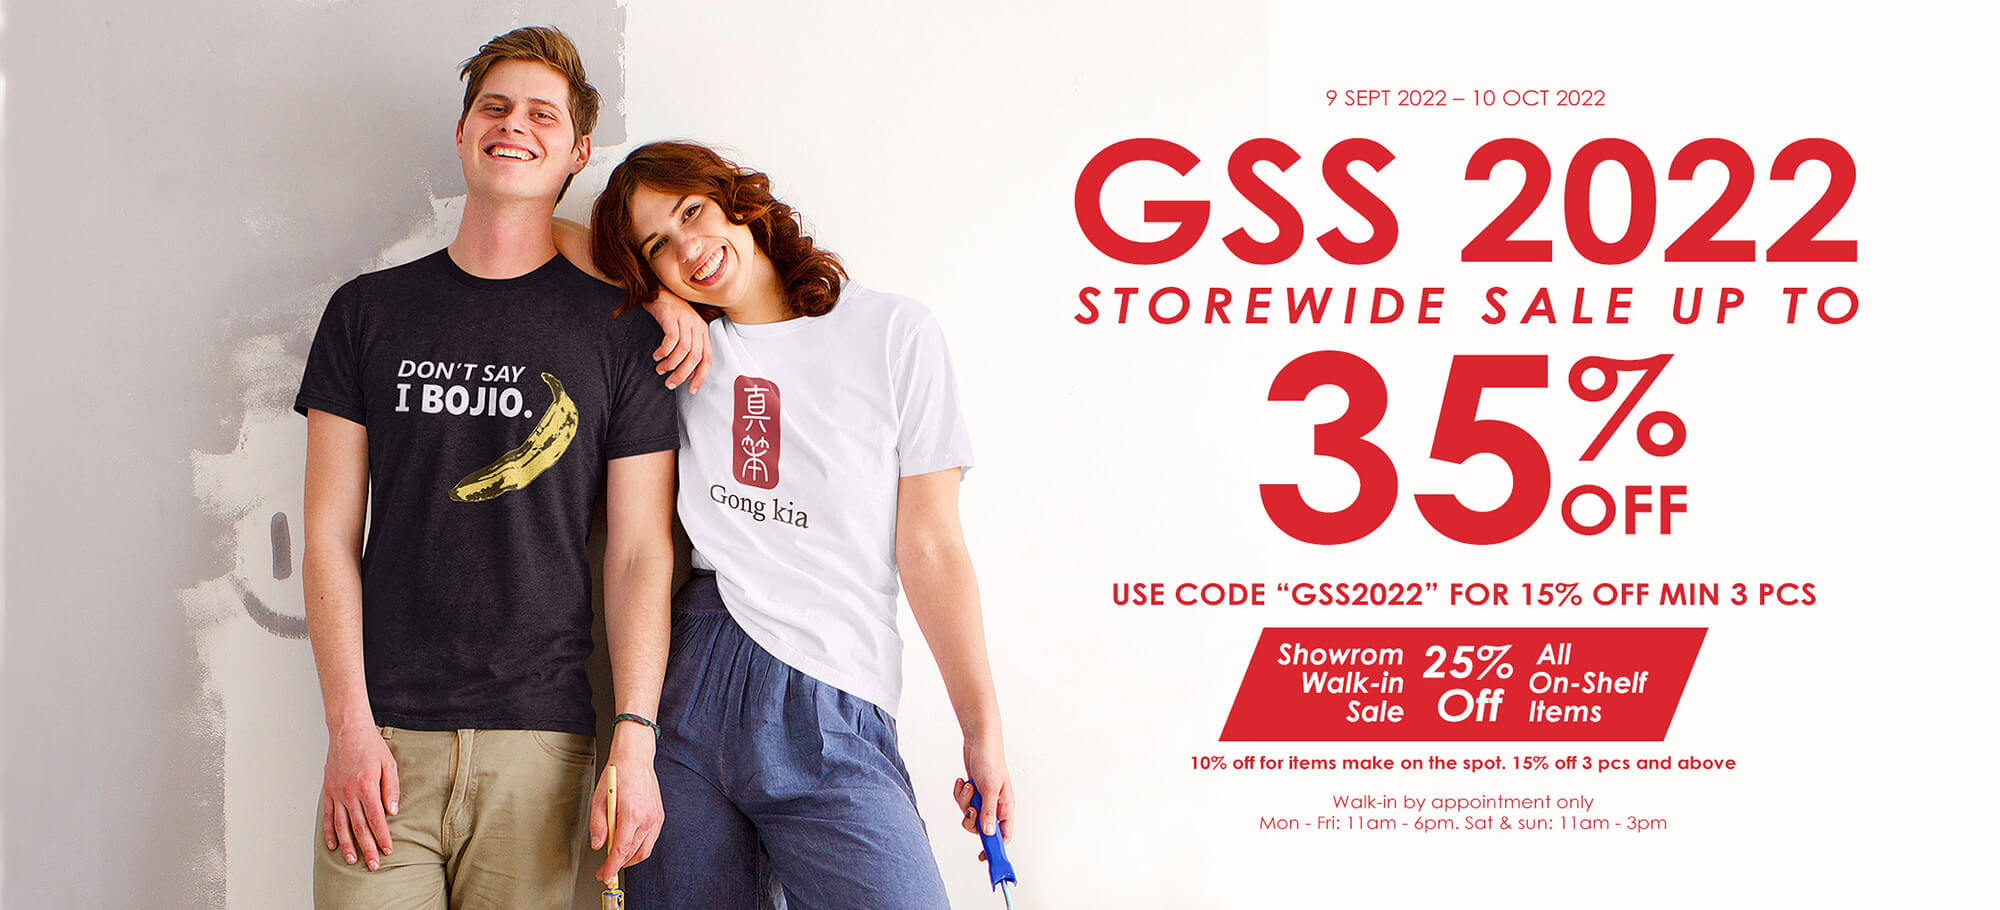 Wetteeshirt GSS 2022 Sale Up to 35% Off